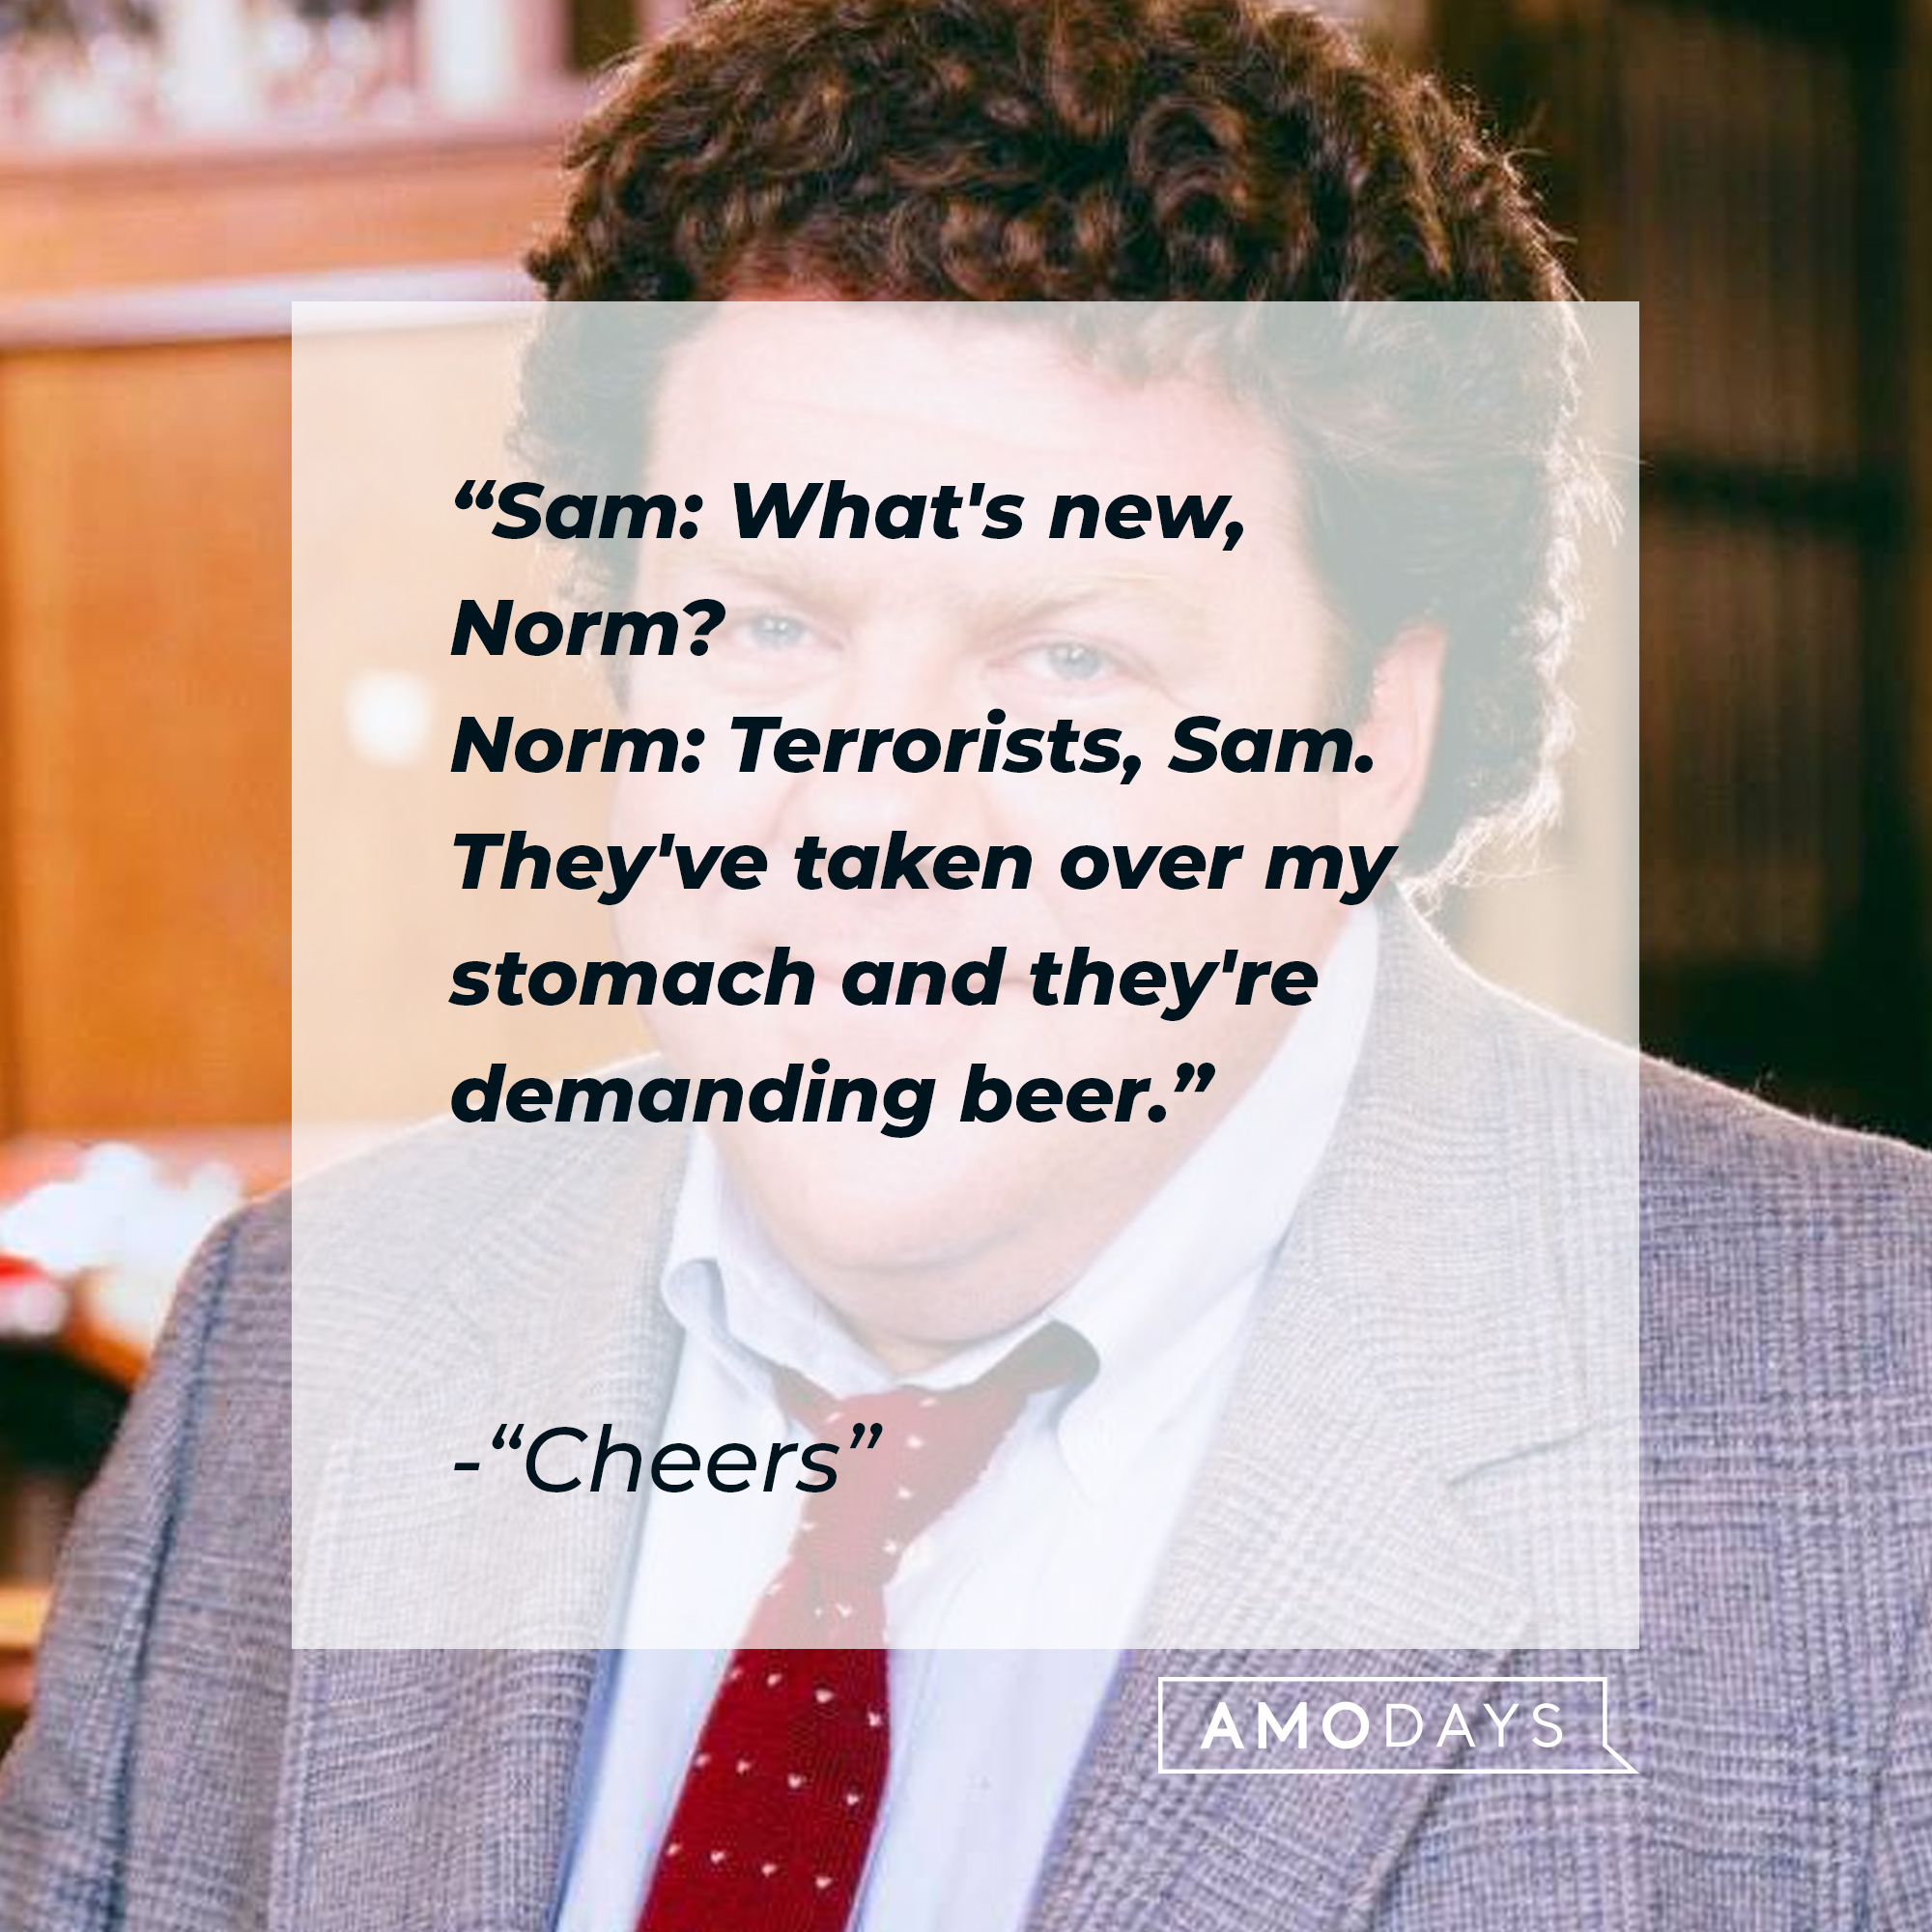 Norm Peterson with his quote: "Sam: What's new, Norm? ; Norm: Terrorists, Sam. They've taken over my stomach and they're demanding beer."  | Source: Facebook.com/Cheers